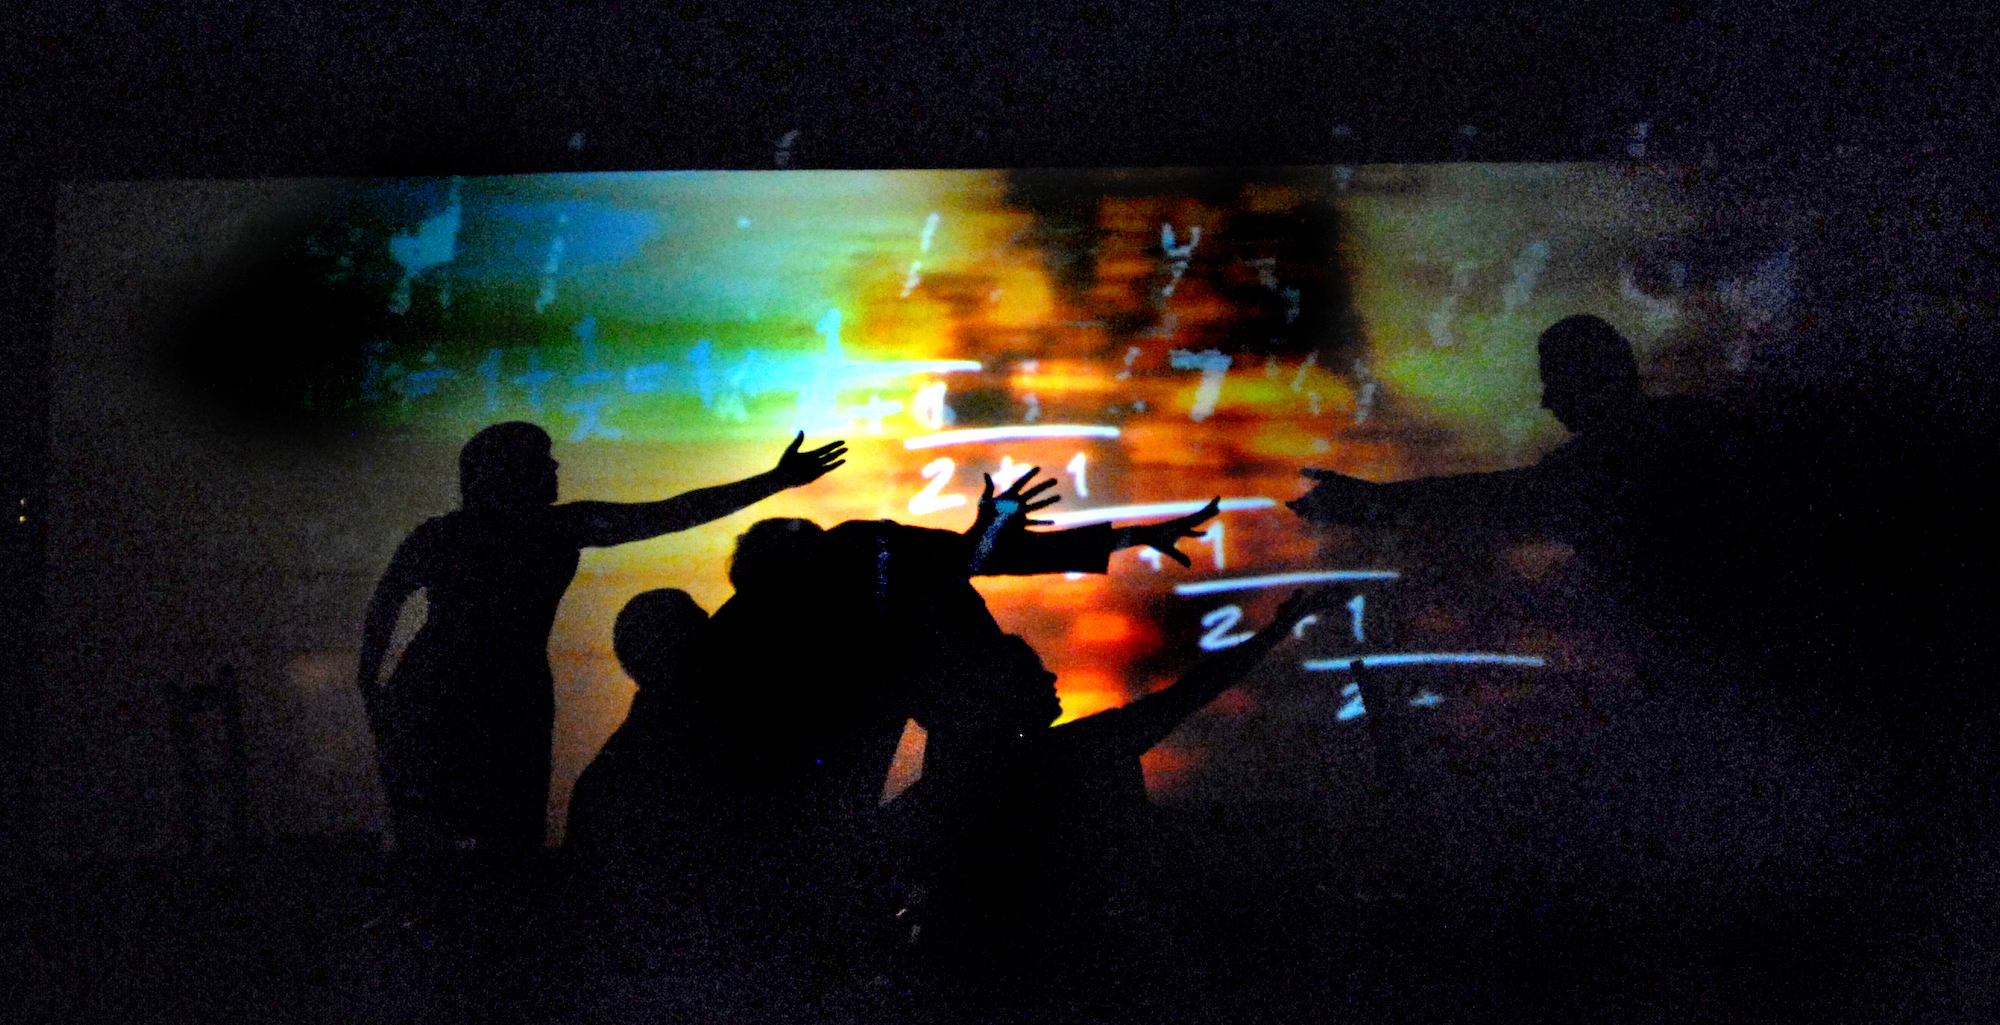 A group of shadowy actors reach towards a shadowy figure on their right, who is also reaching towards them, while we see mathematical theorems projected on the back stage in fire colours